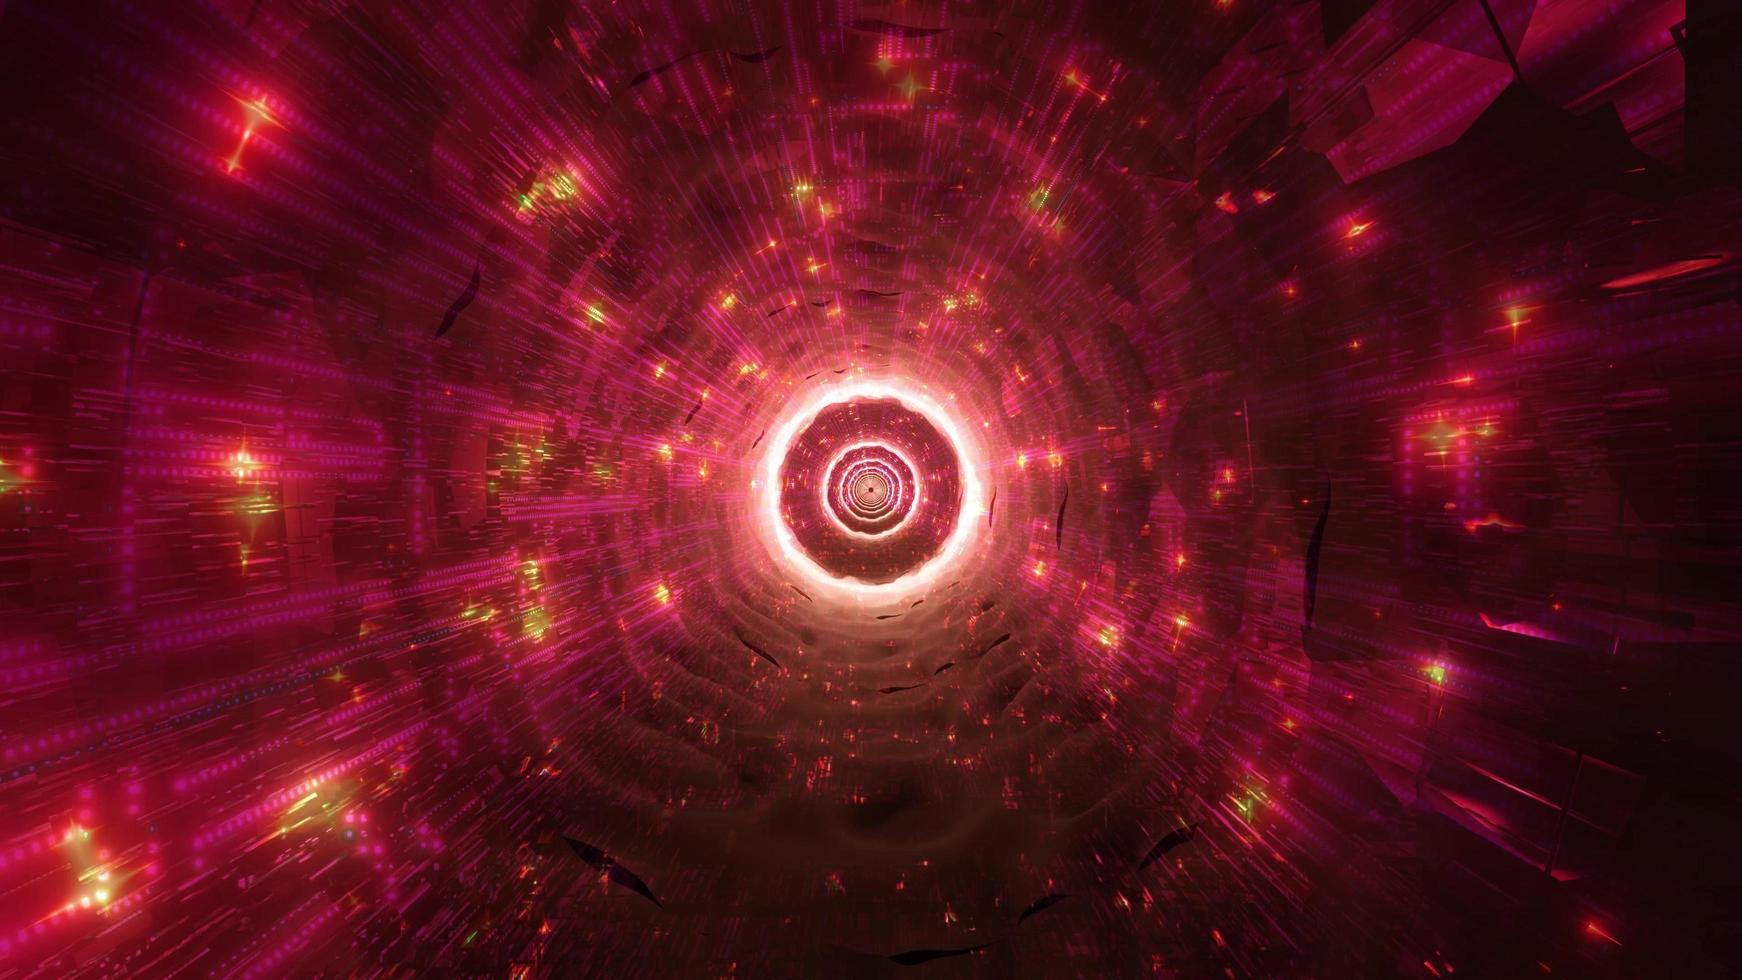 Glowing technical sci-fi space tunnel 3d illustration design artwork background wallpaper photo